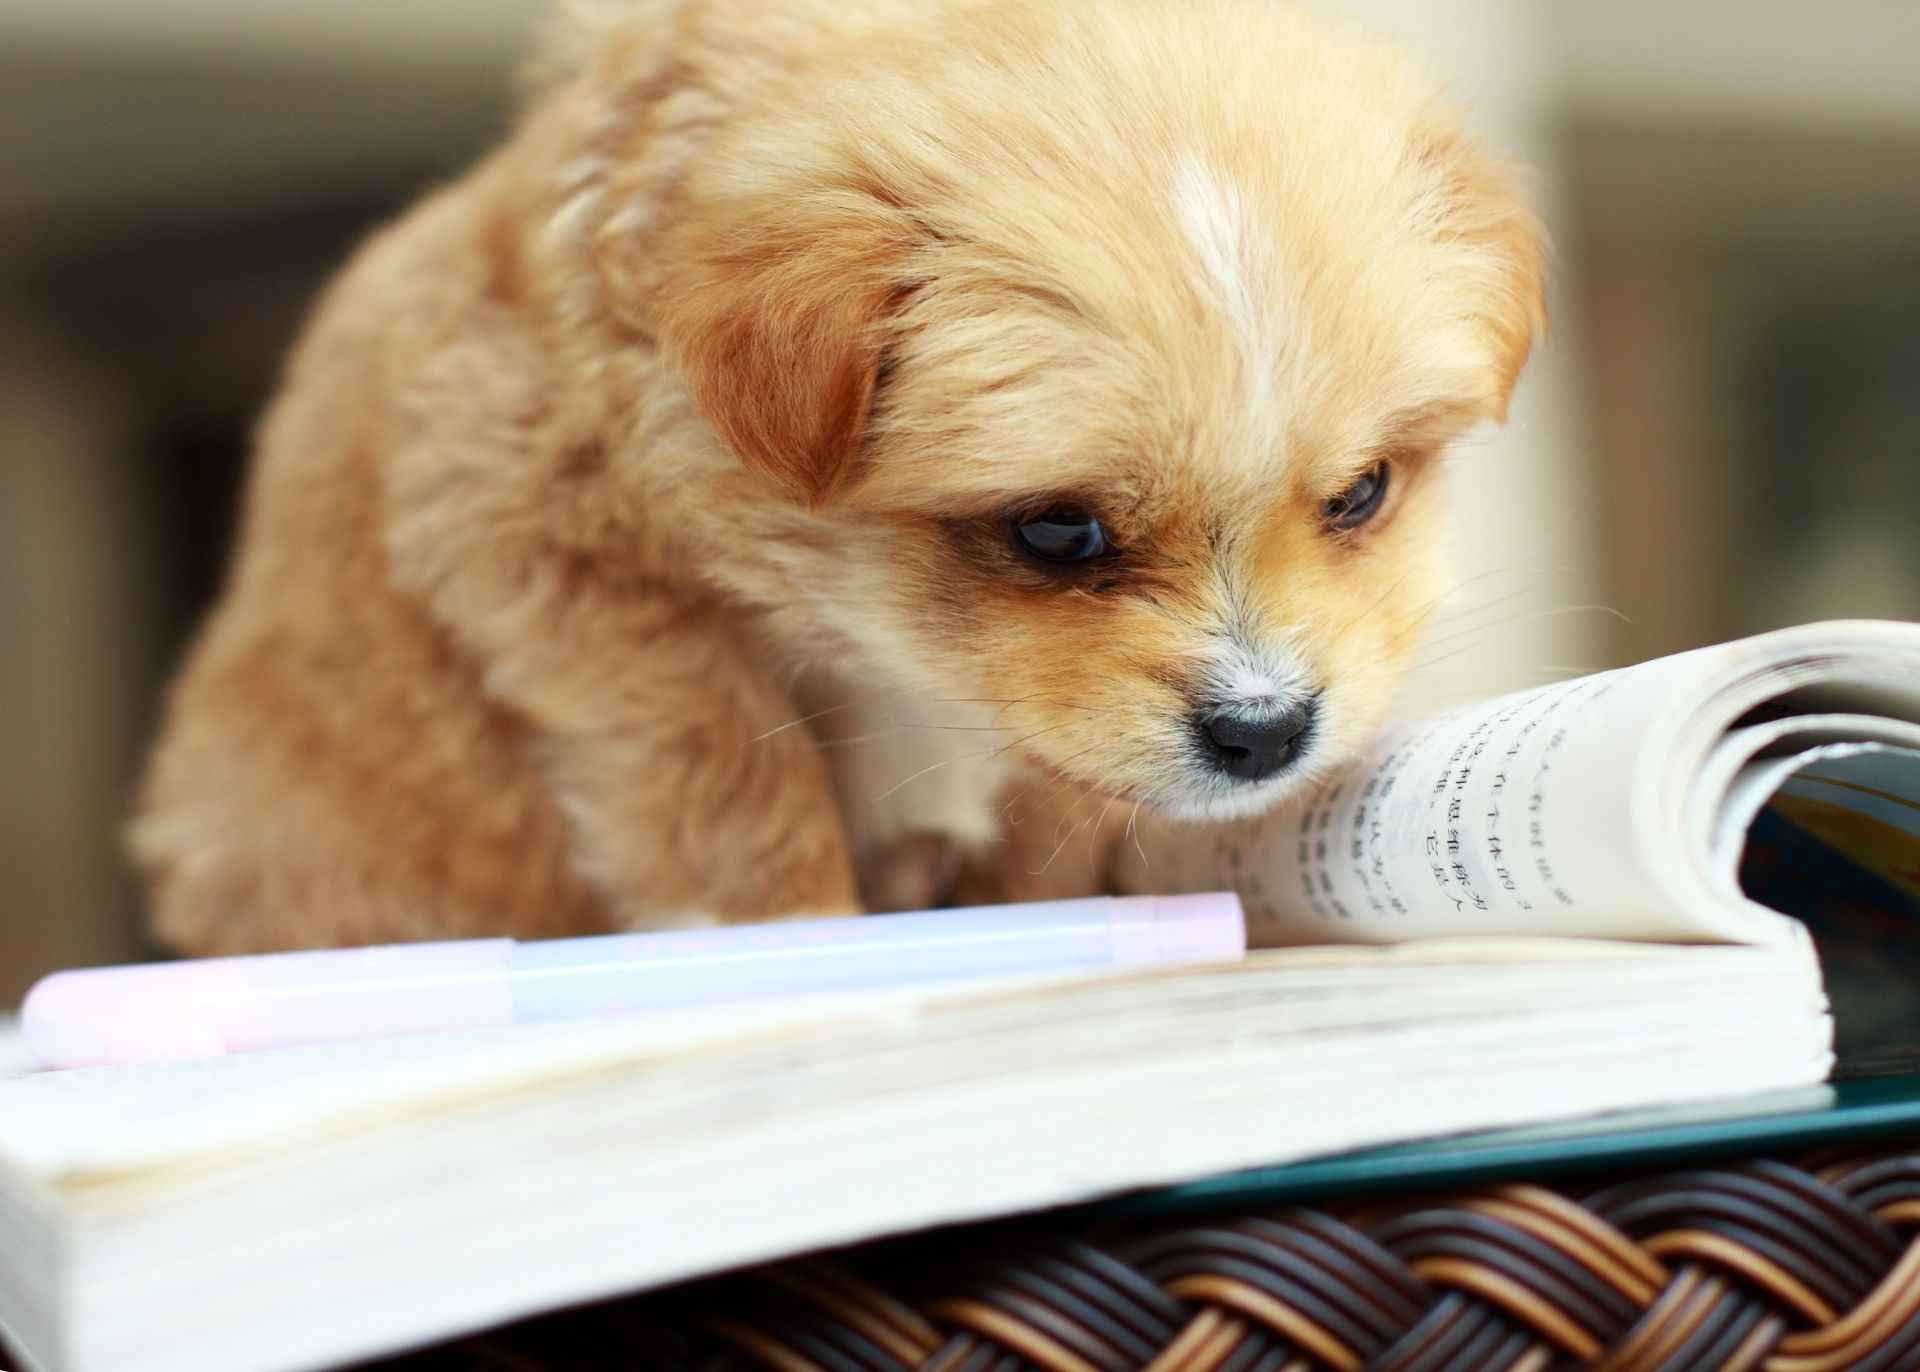 Cream colored small breed puppy with white blaze on forehead crawling on open textbook